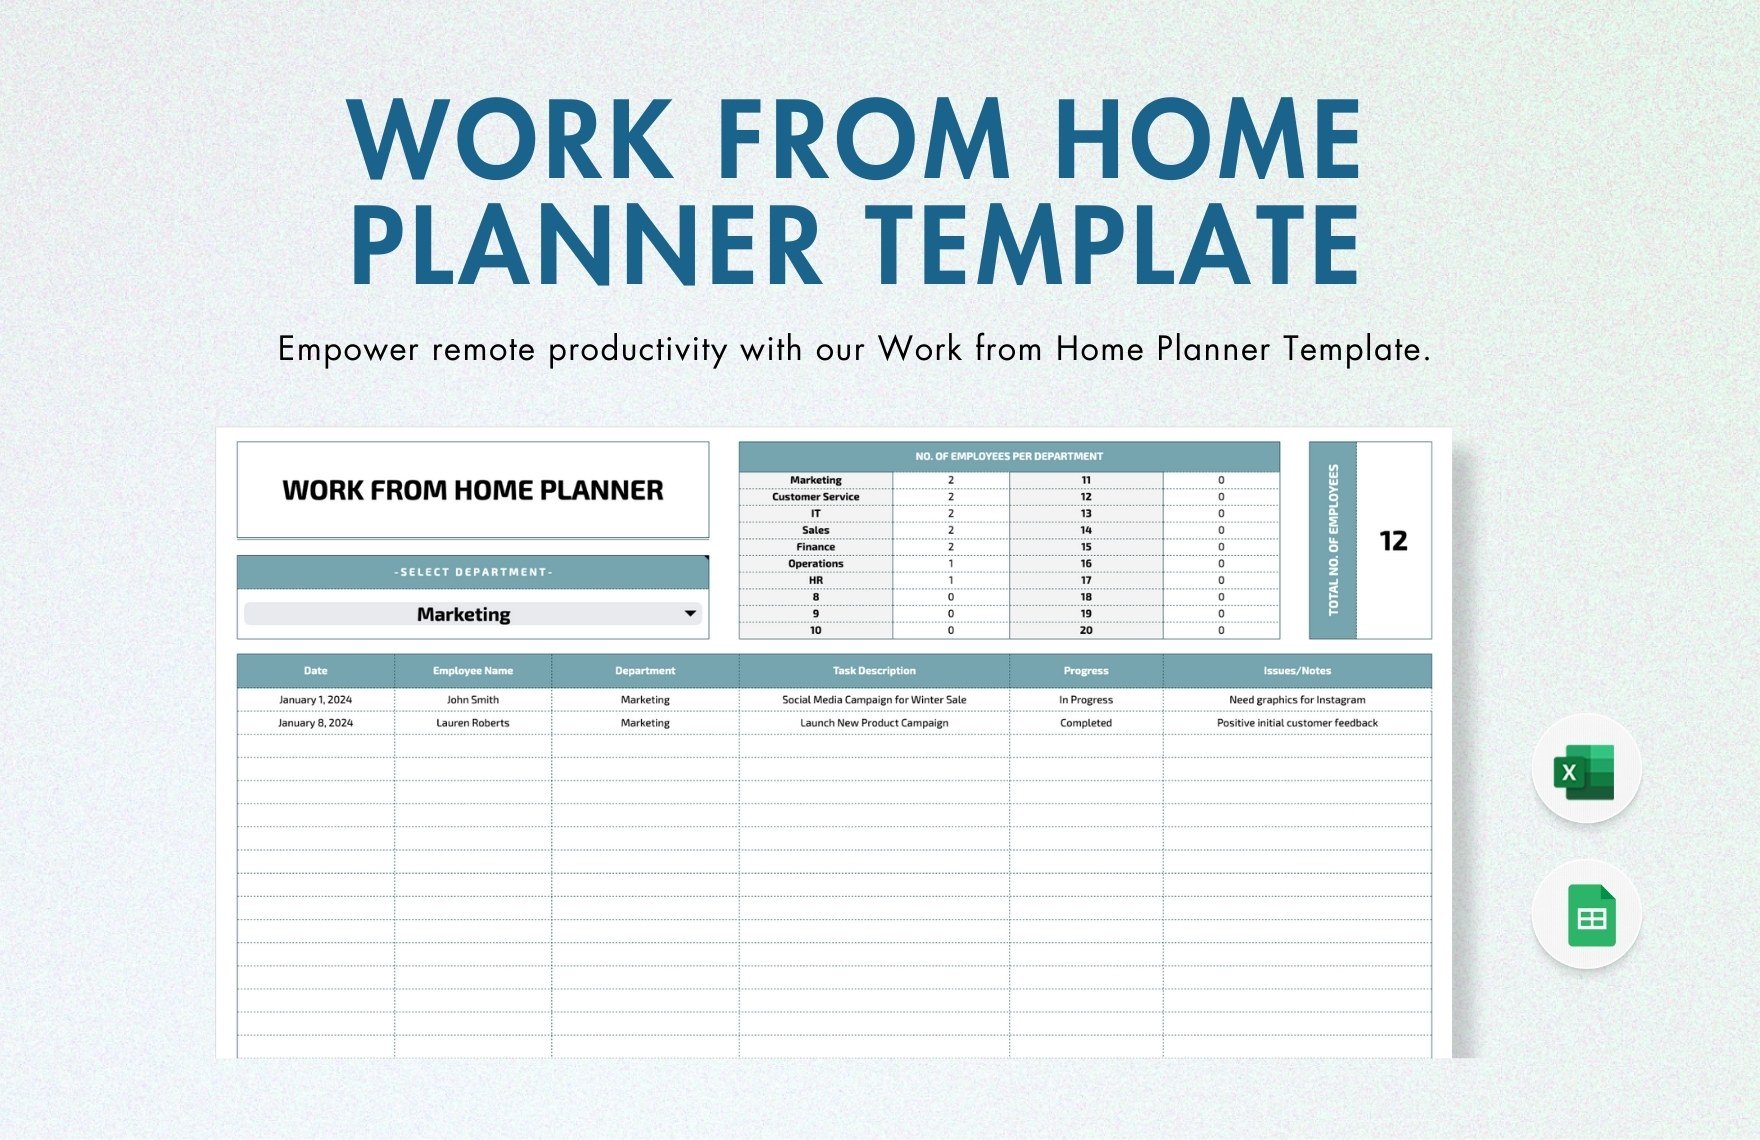 Work from Home Planner Template